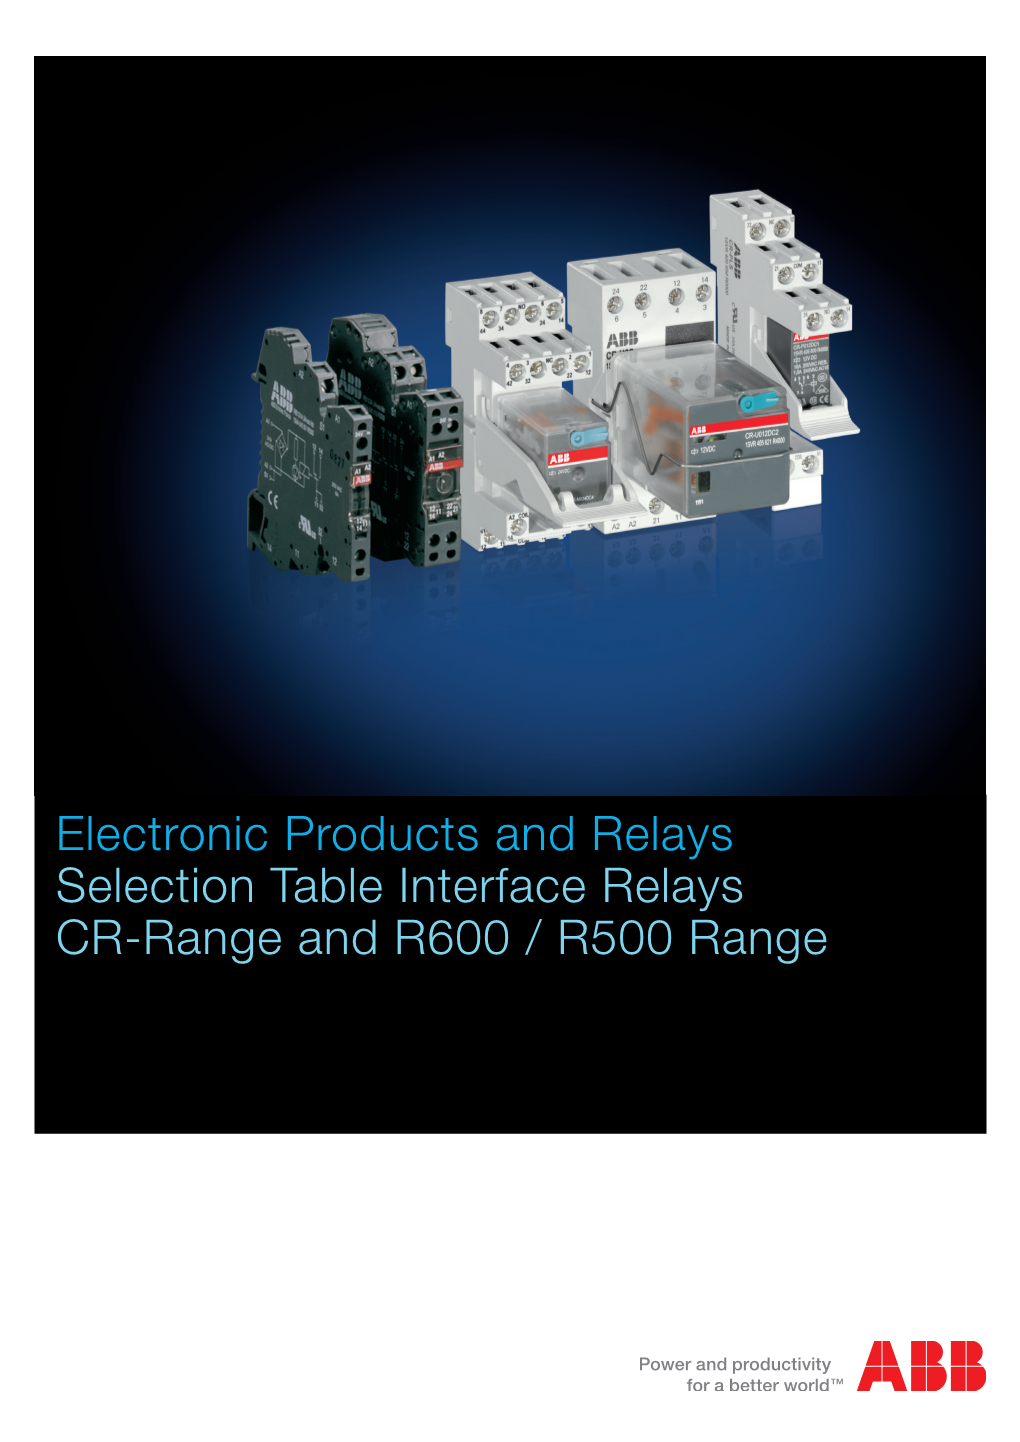 Electronic Products and Relays Selection Table Interface Relays CR-Range and R600 / R500 Range Pluggable Interface Relays